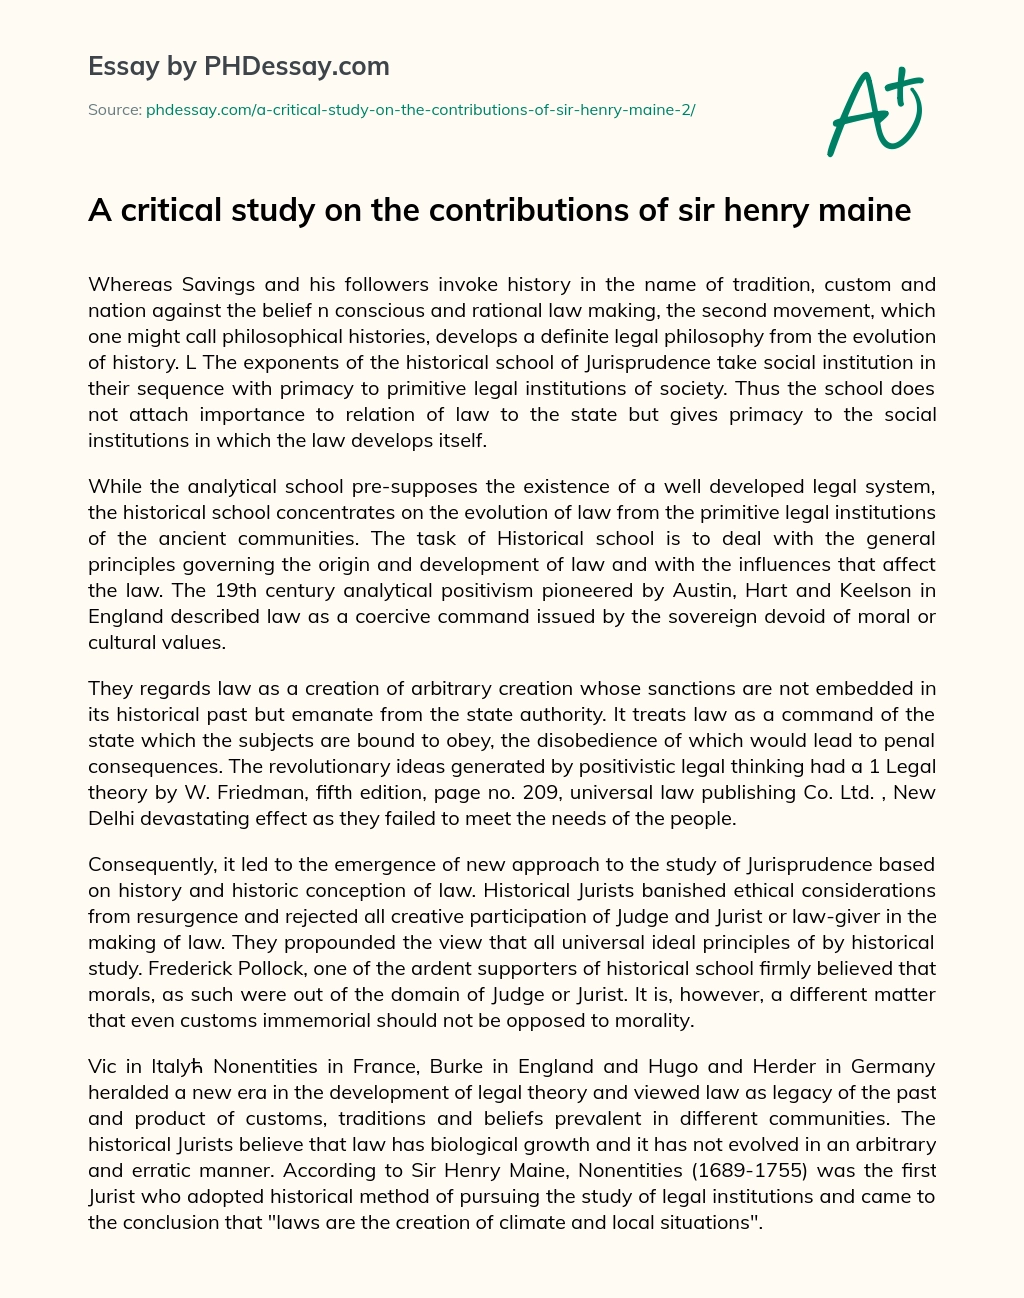 A Critical Study on the Contributions of Sir Henry Maine essay